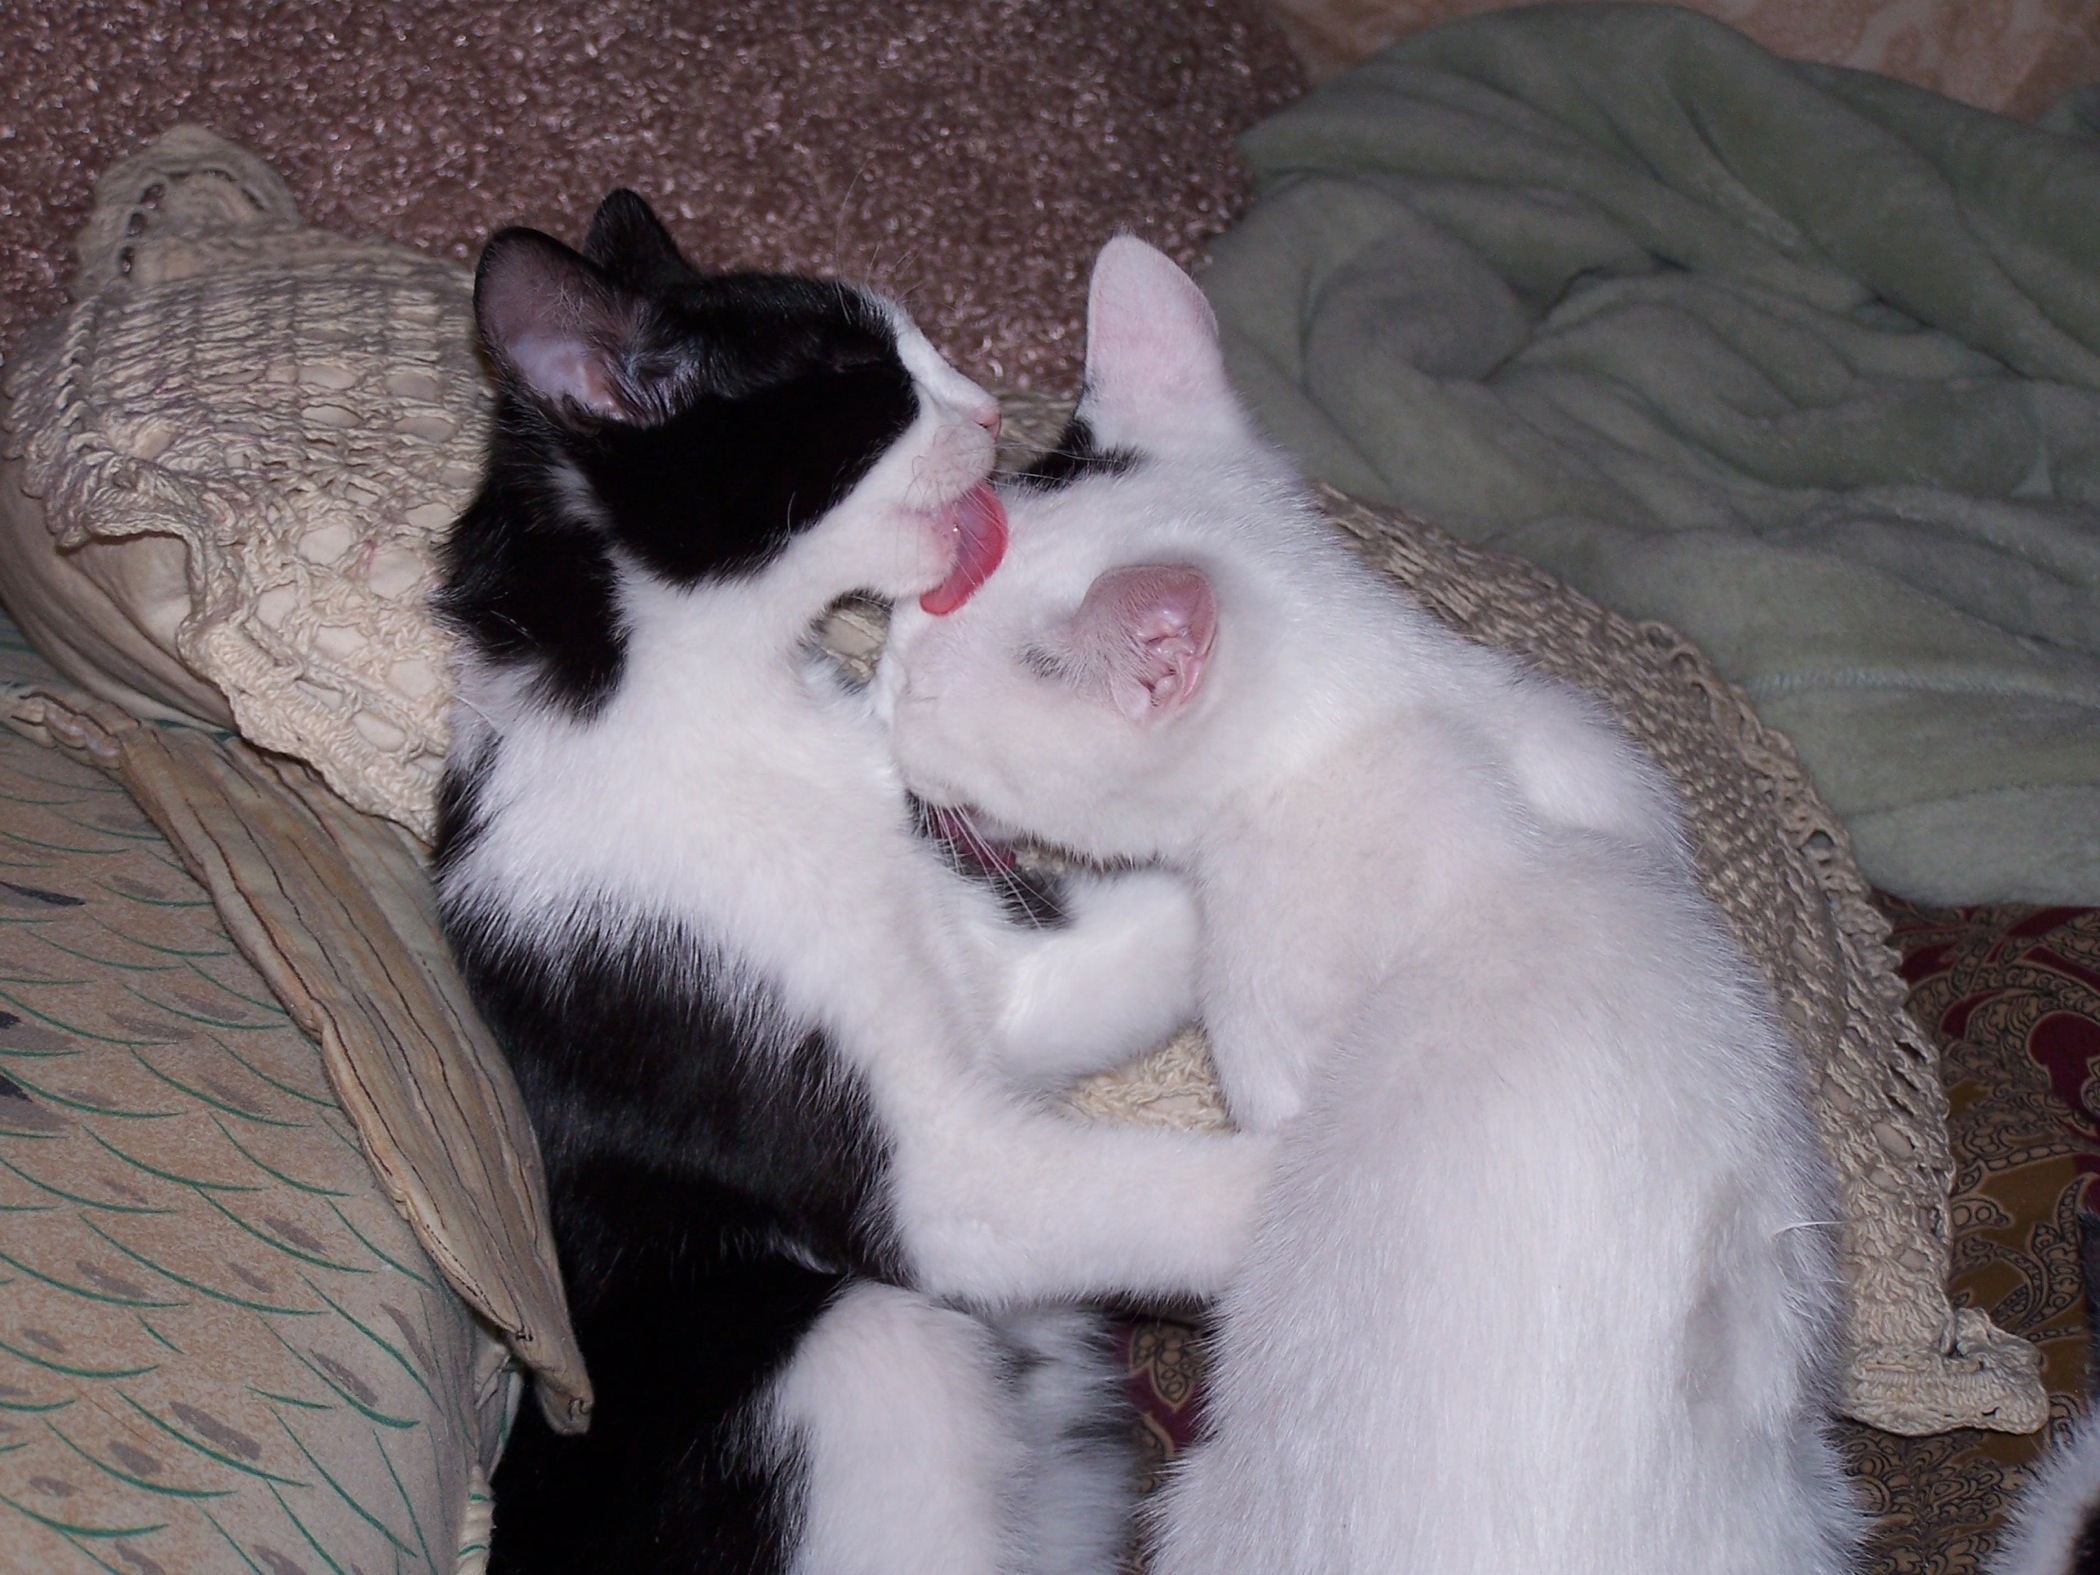 Kitty Love (user submitted)